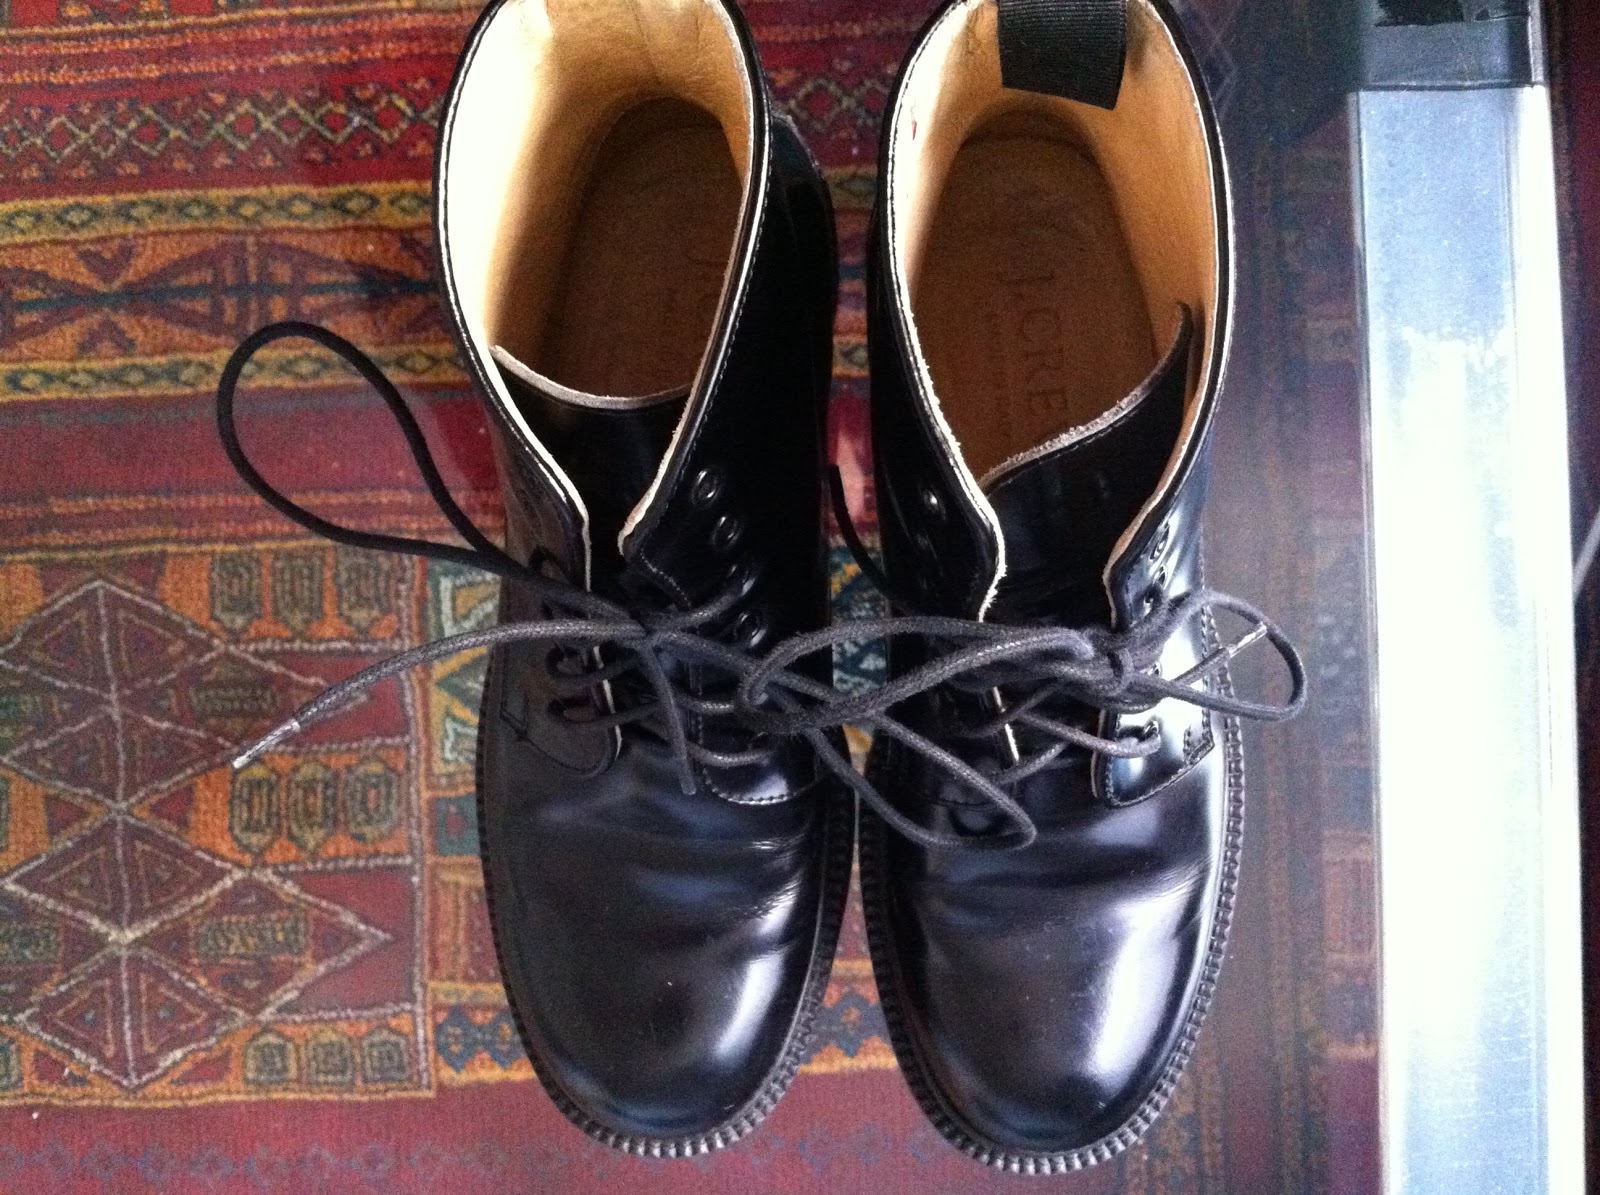 laws of general economy: J Crew Black Shiny Leather Military Boots Size 5